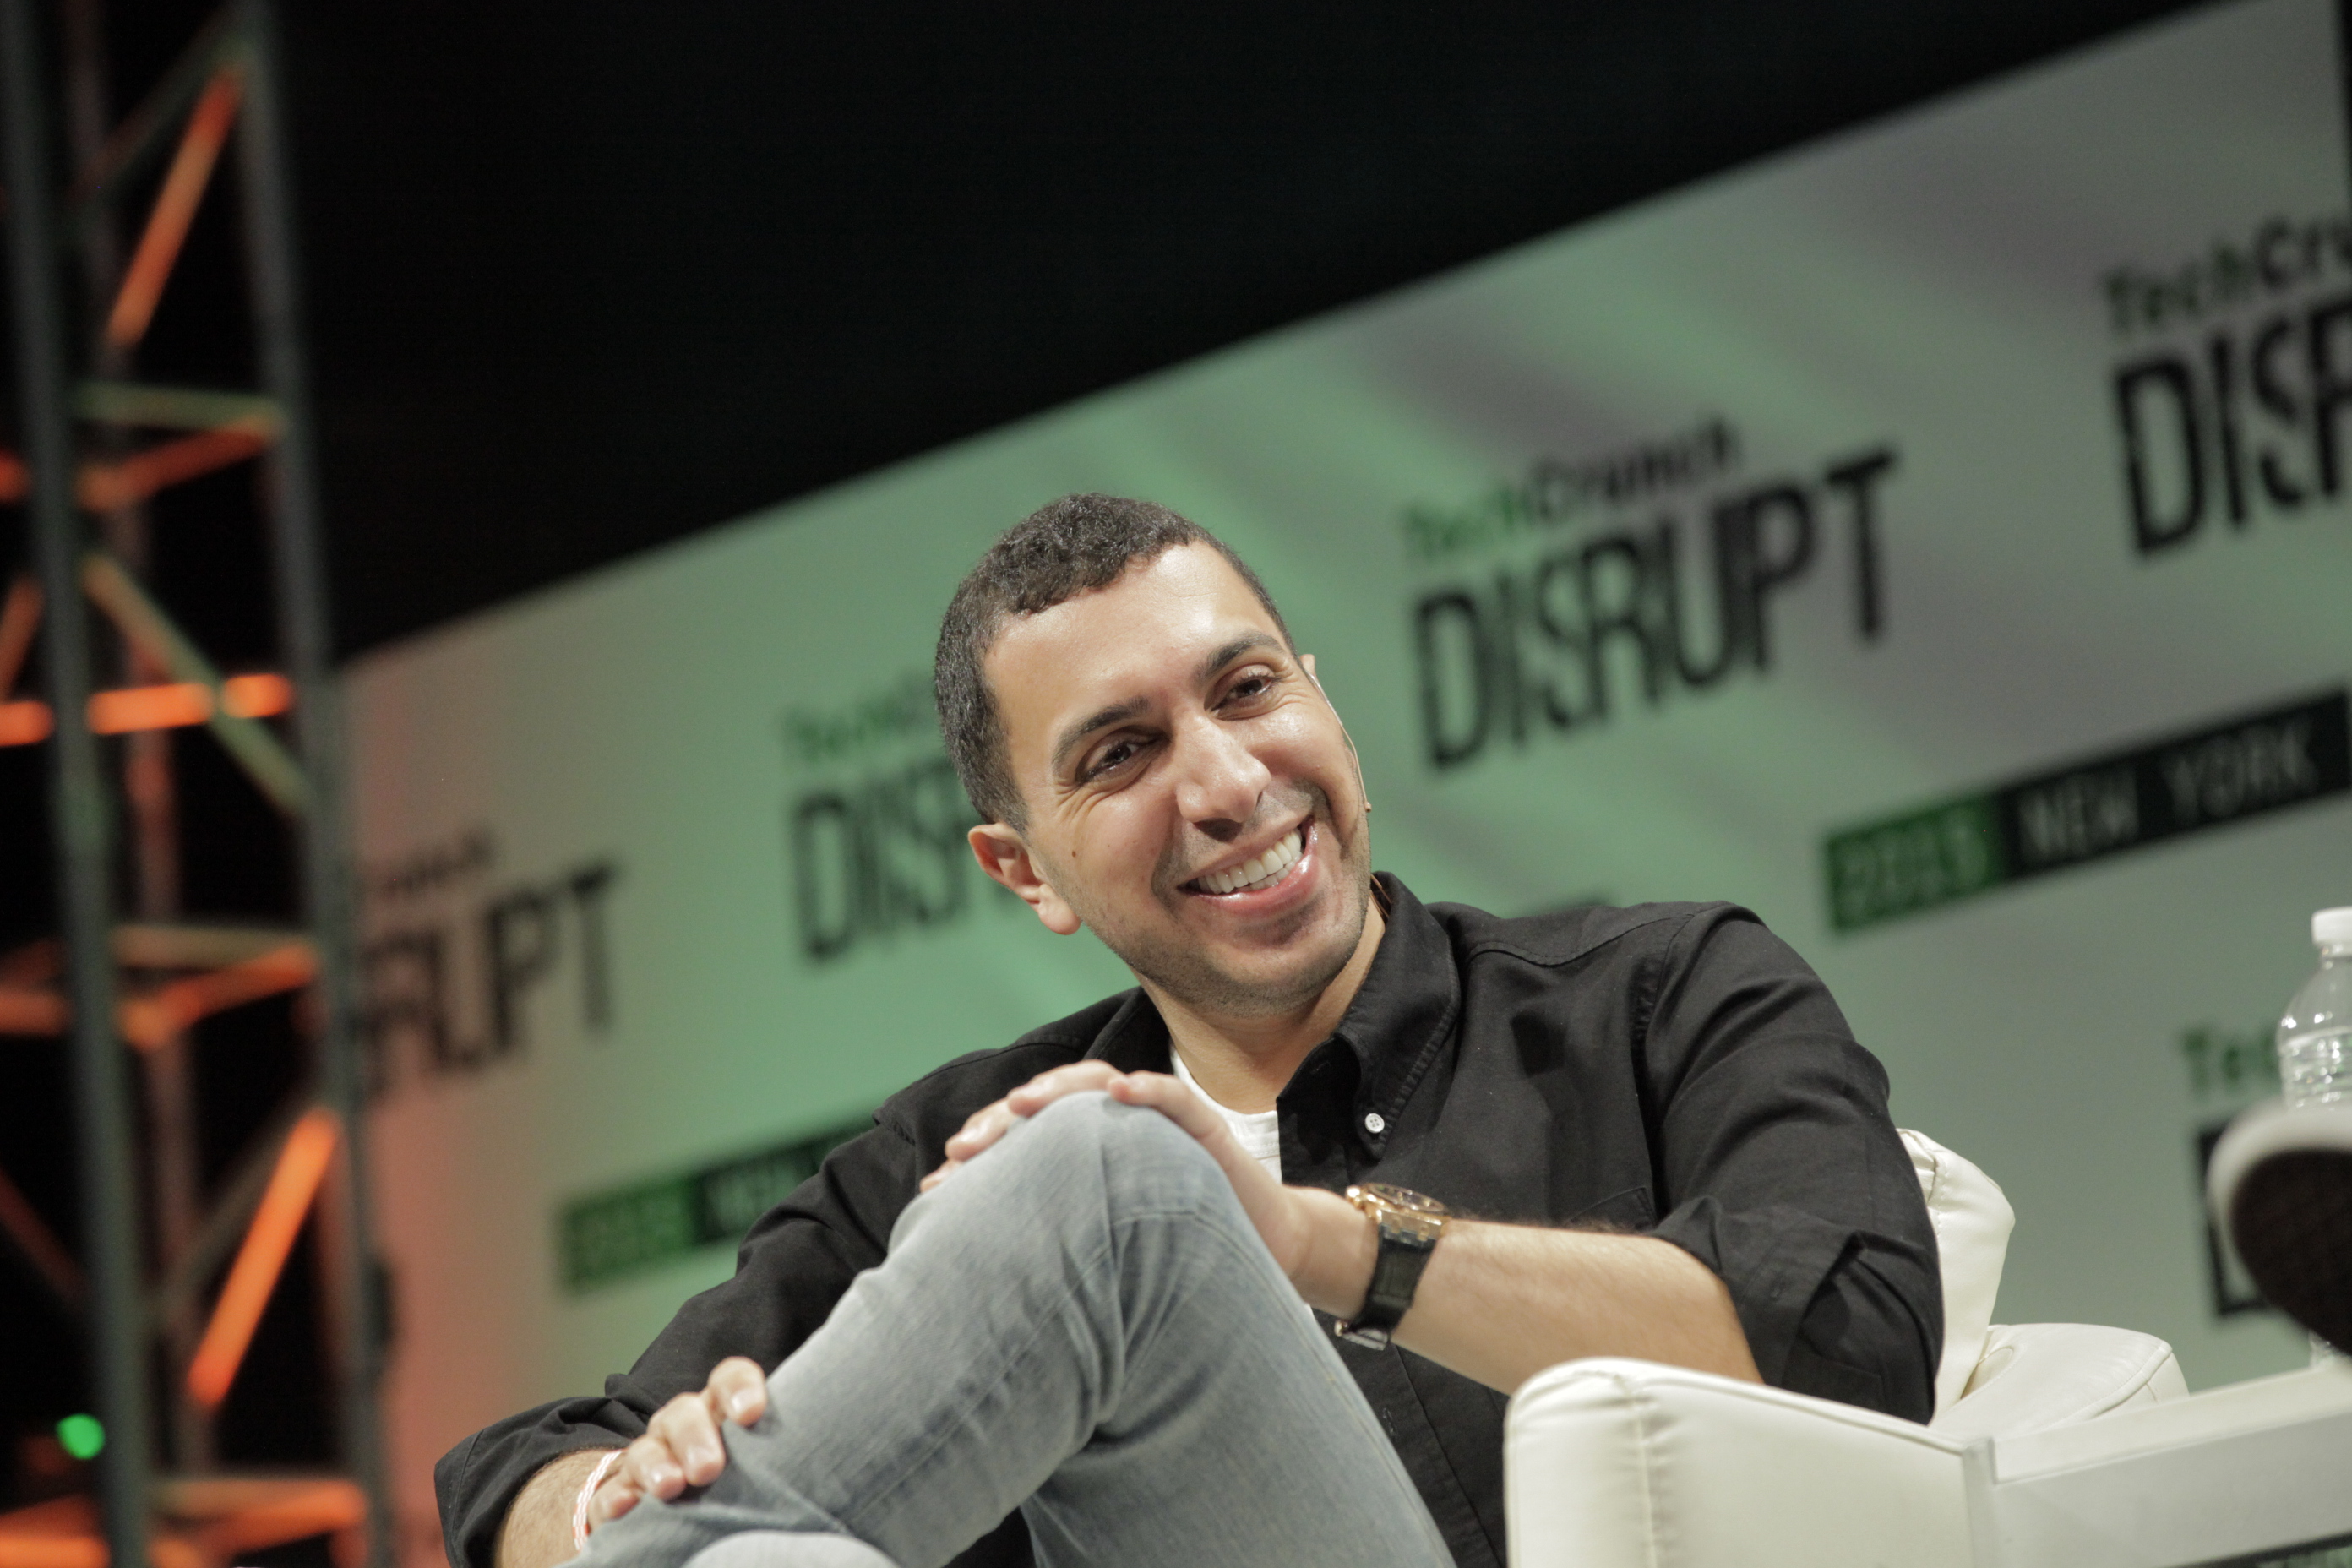 Sean Rad steps away from CEO role (again) to run Tinder’s new Swipe Ventures